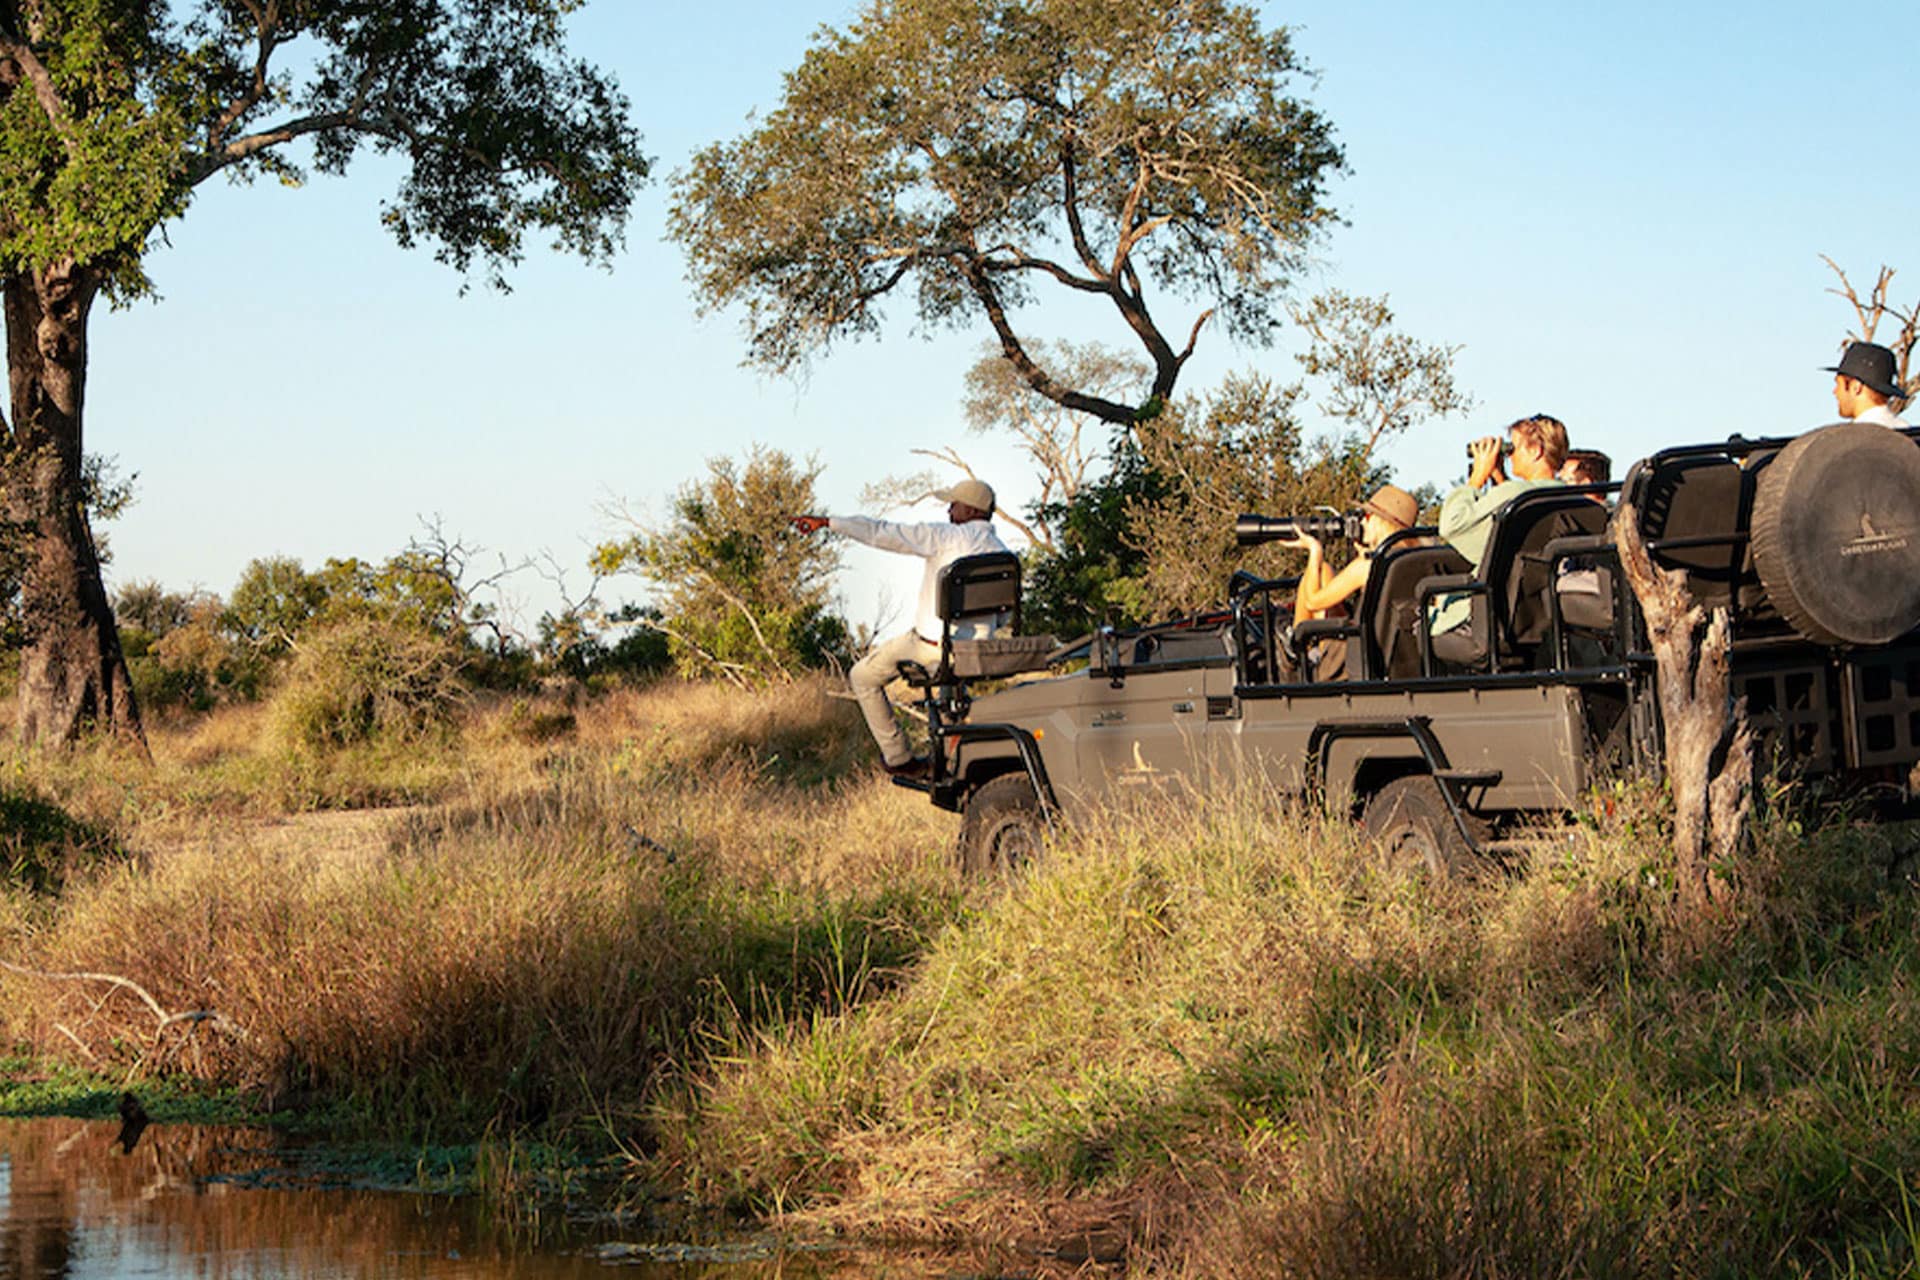 People going on a game drive in the Sabi Sands Game Reserve using a Land Cruiser electric safari vehicle from Cheetah Plains.